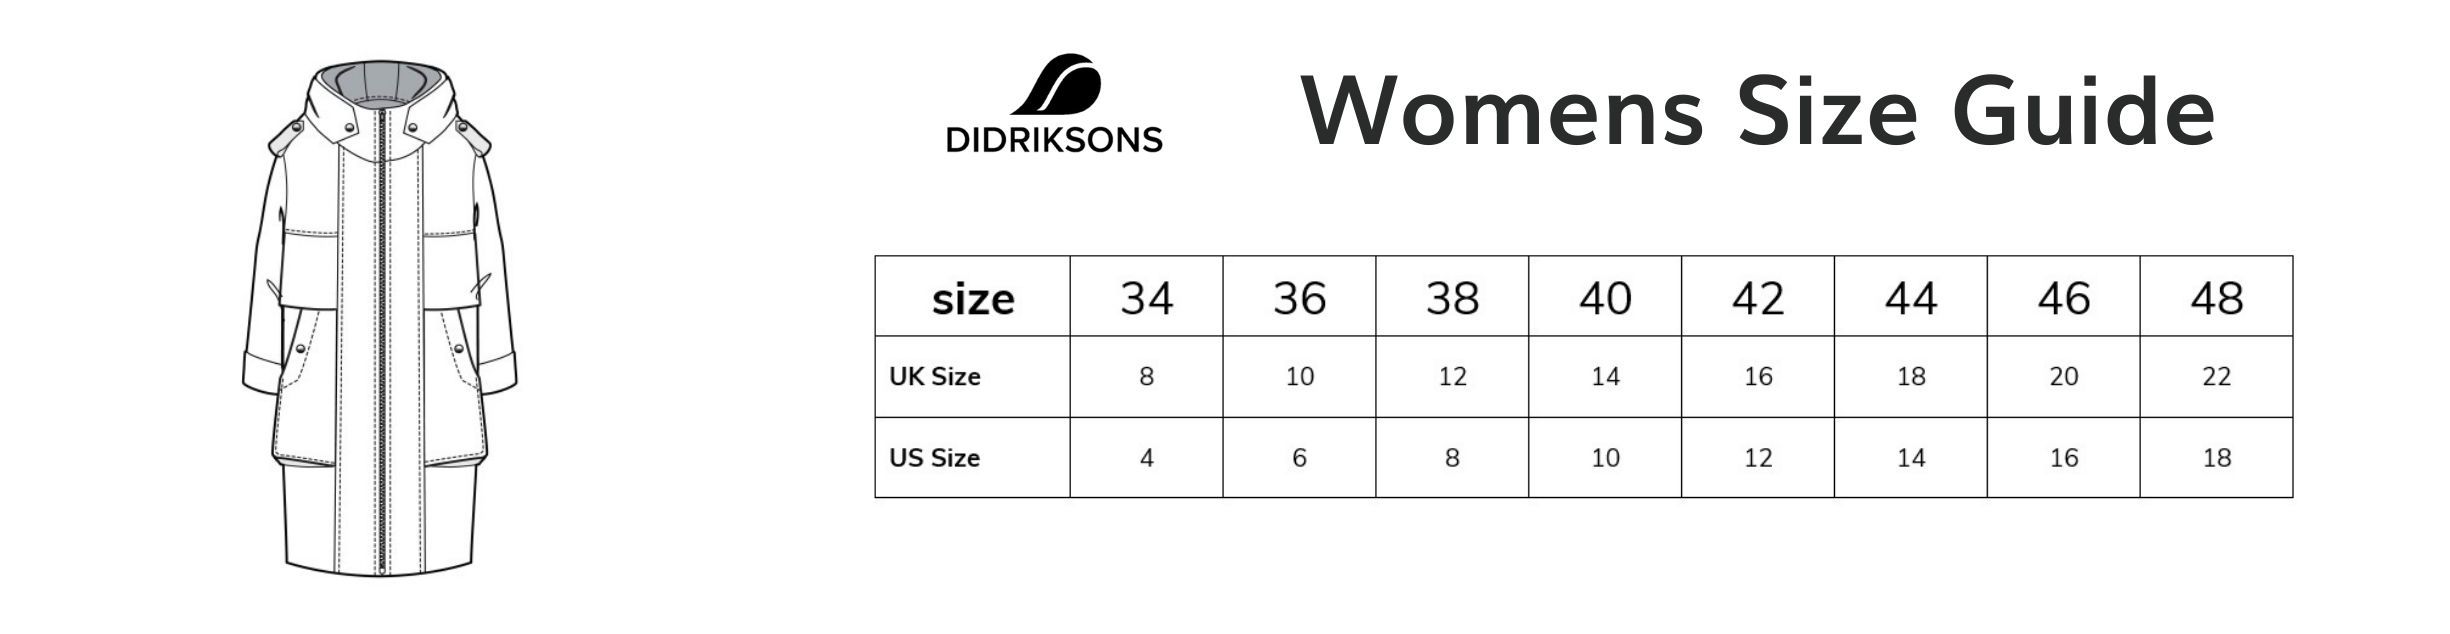 Didriksons Size Guide - Nordic Outdoor